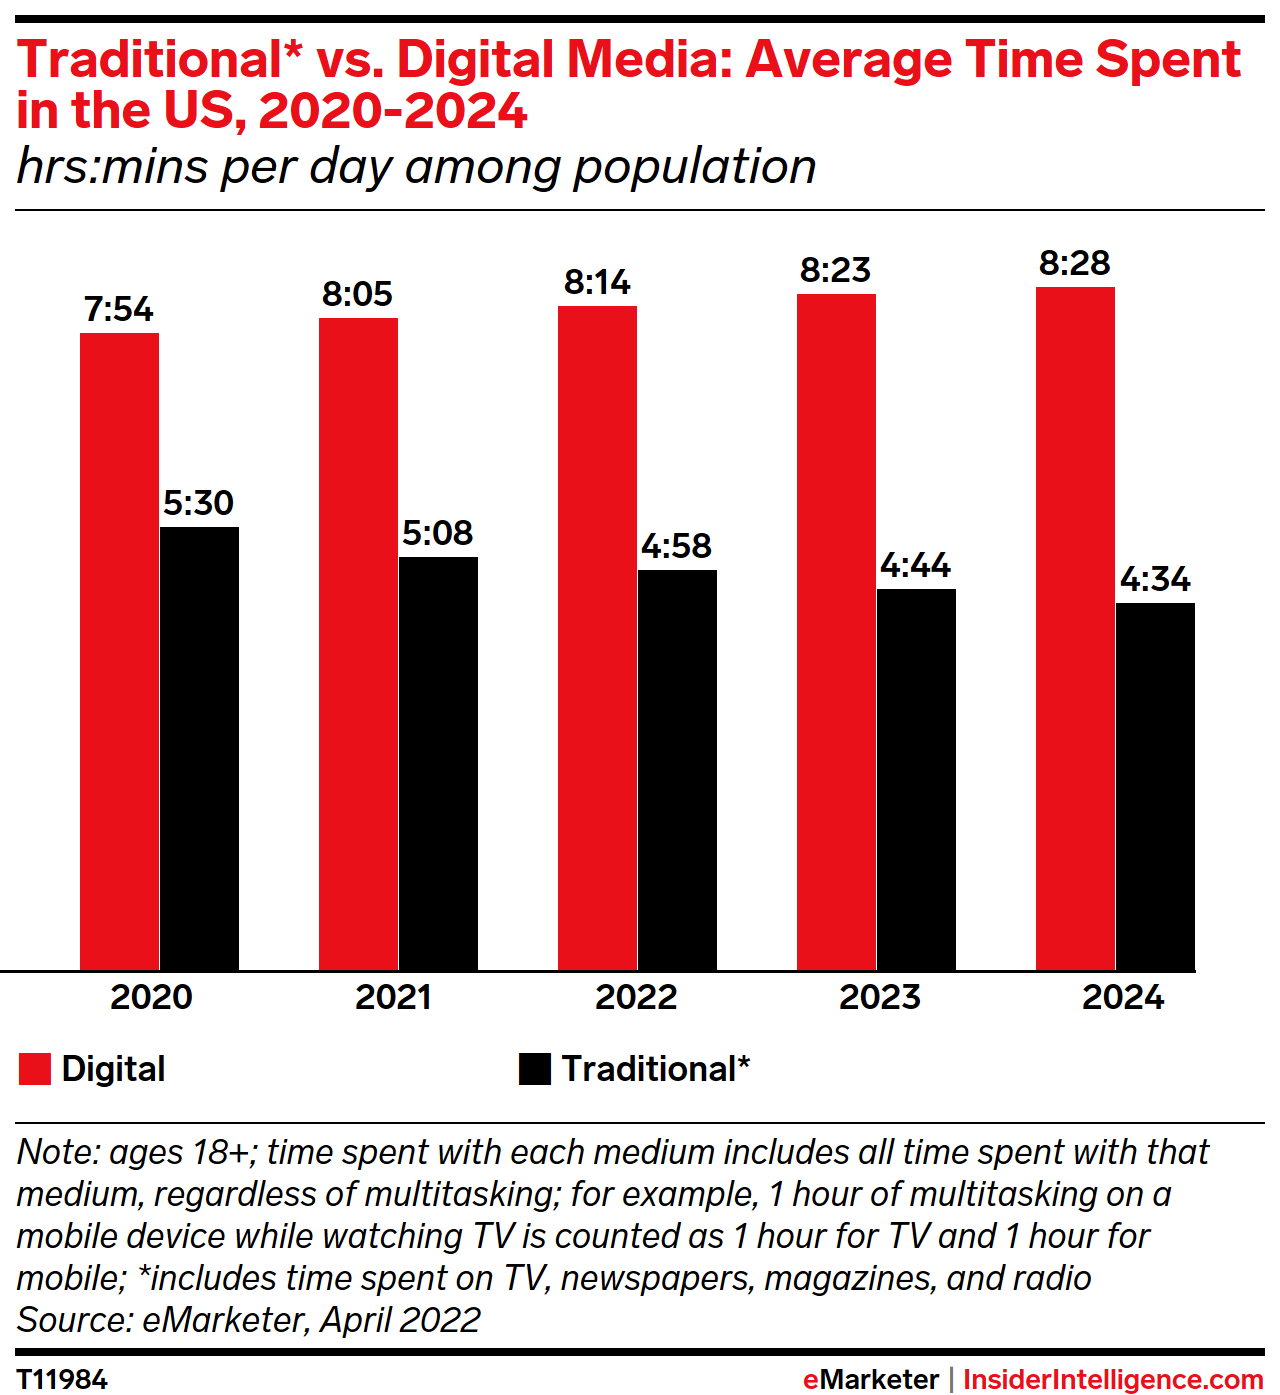 Traditional* vs. Digital Media: Average Time Spent in the US, 2020-2024 (hrs:mins per day among population)